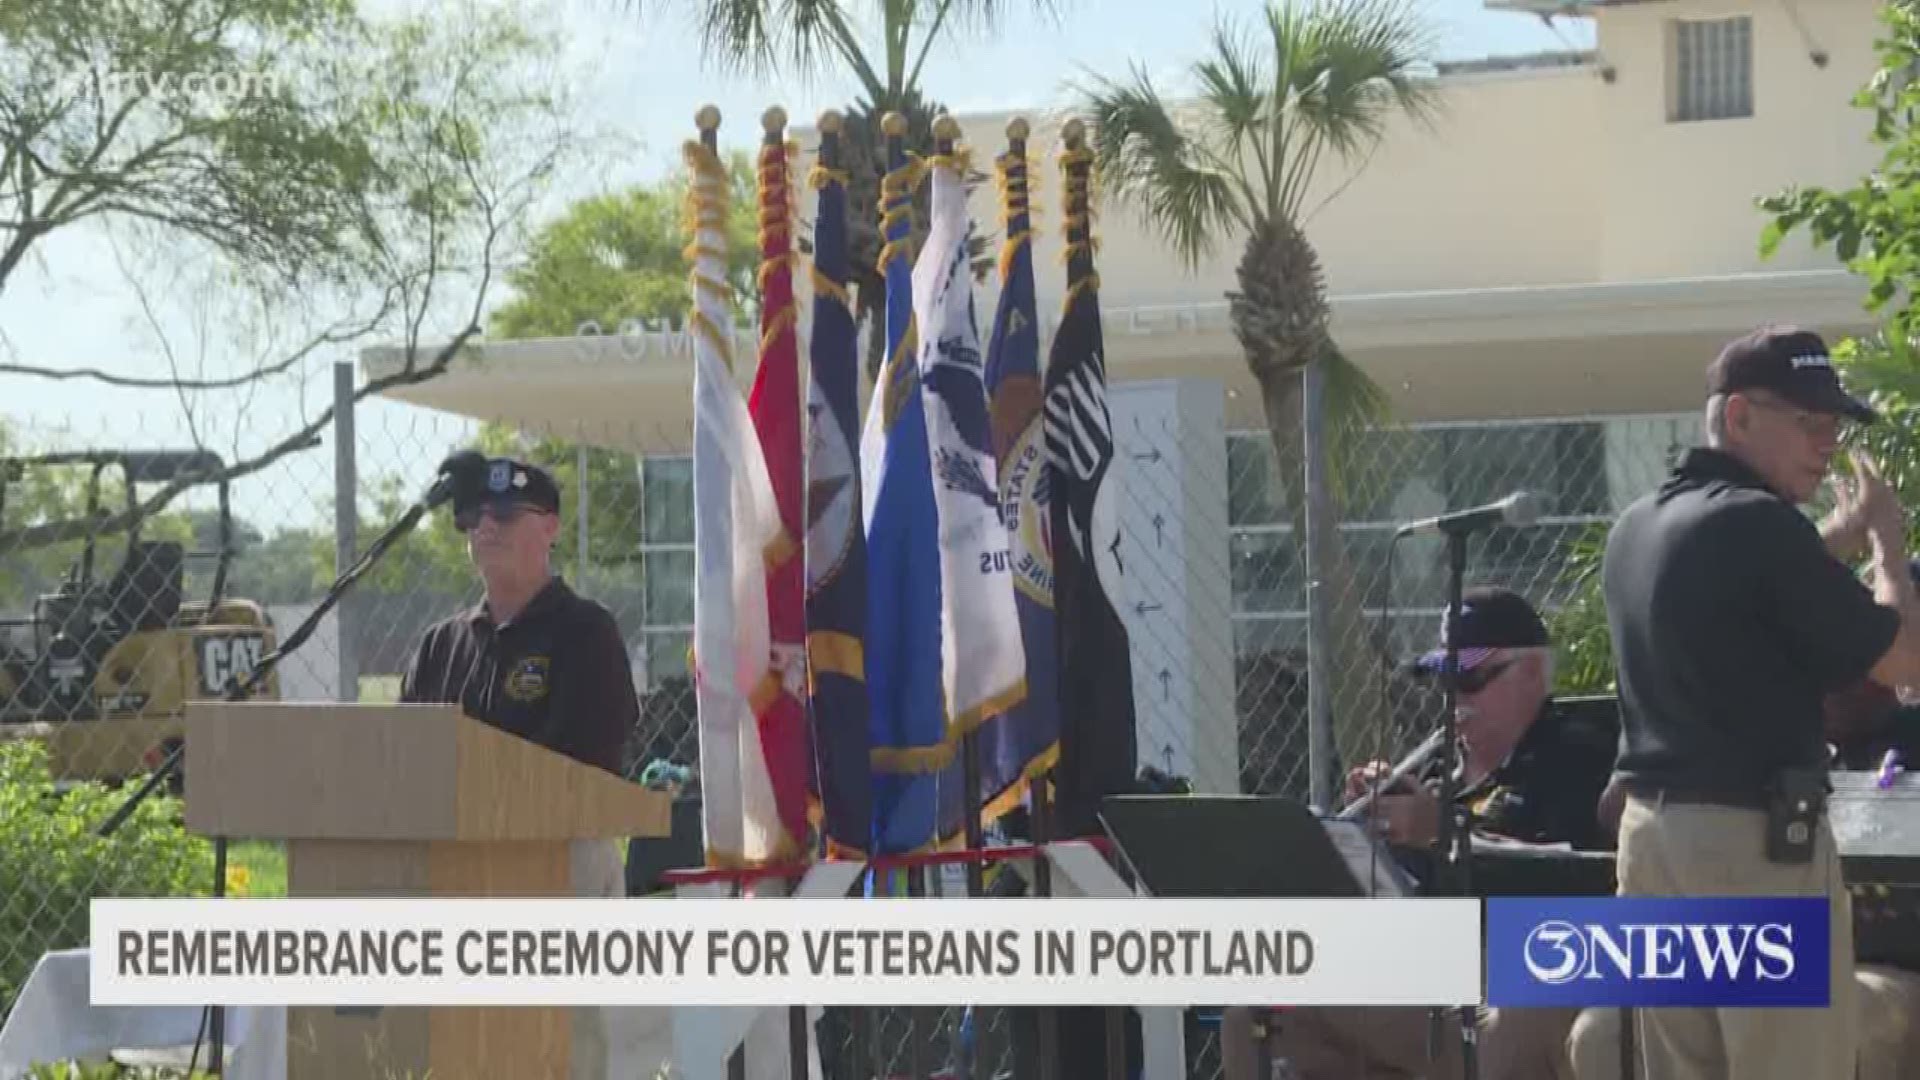 The event to commemorate the veterans was held in front of the Portland police department.